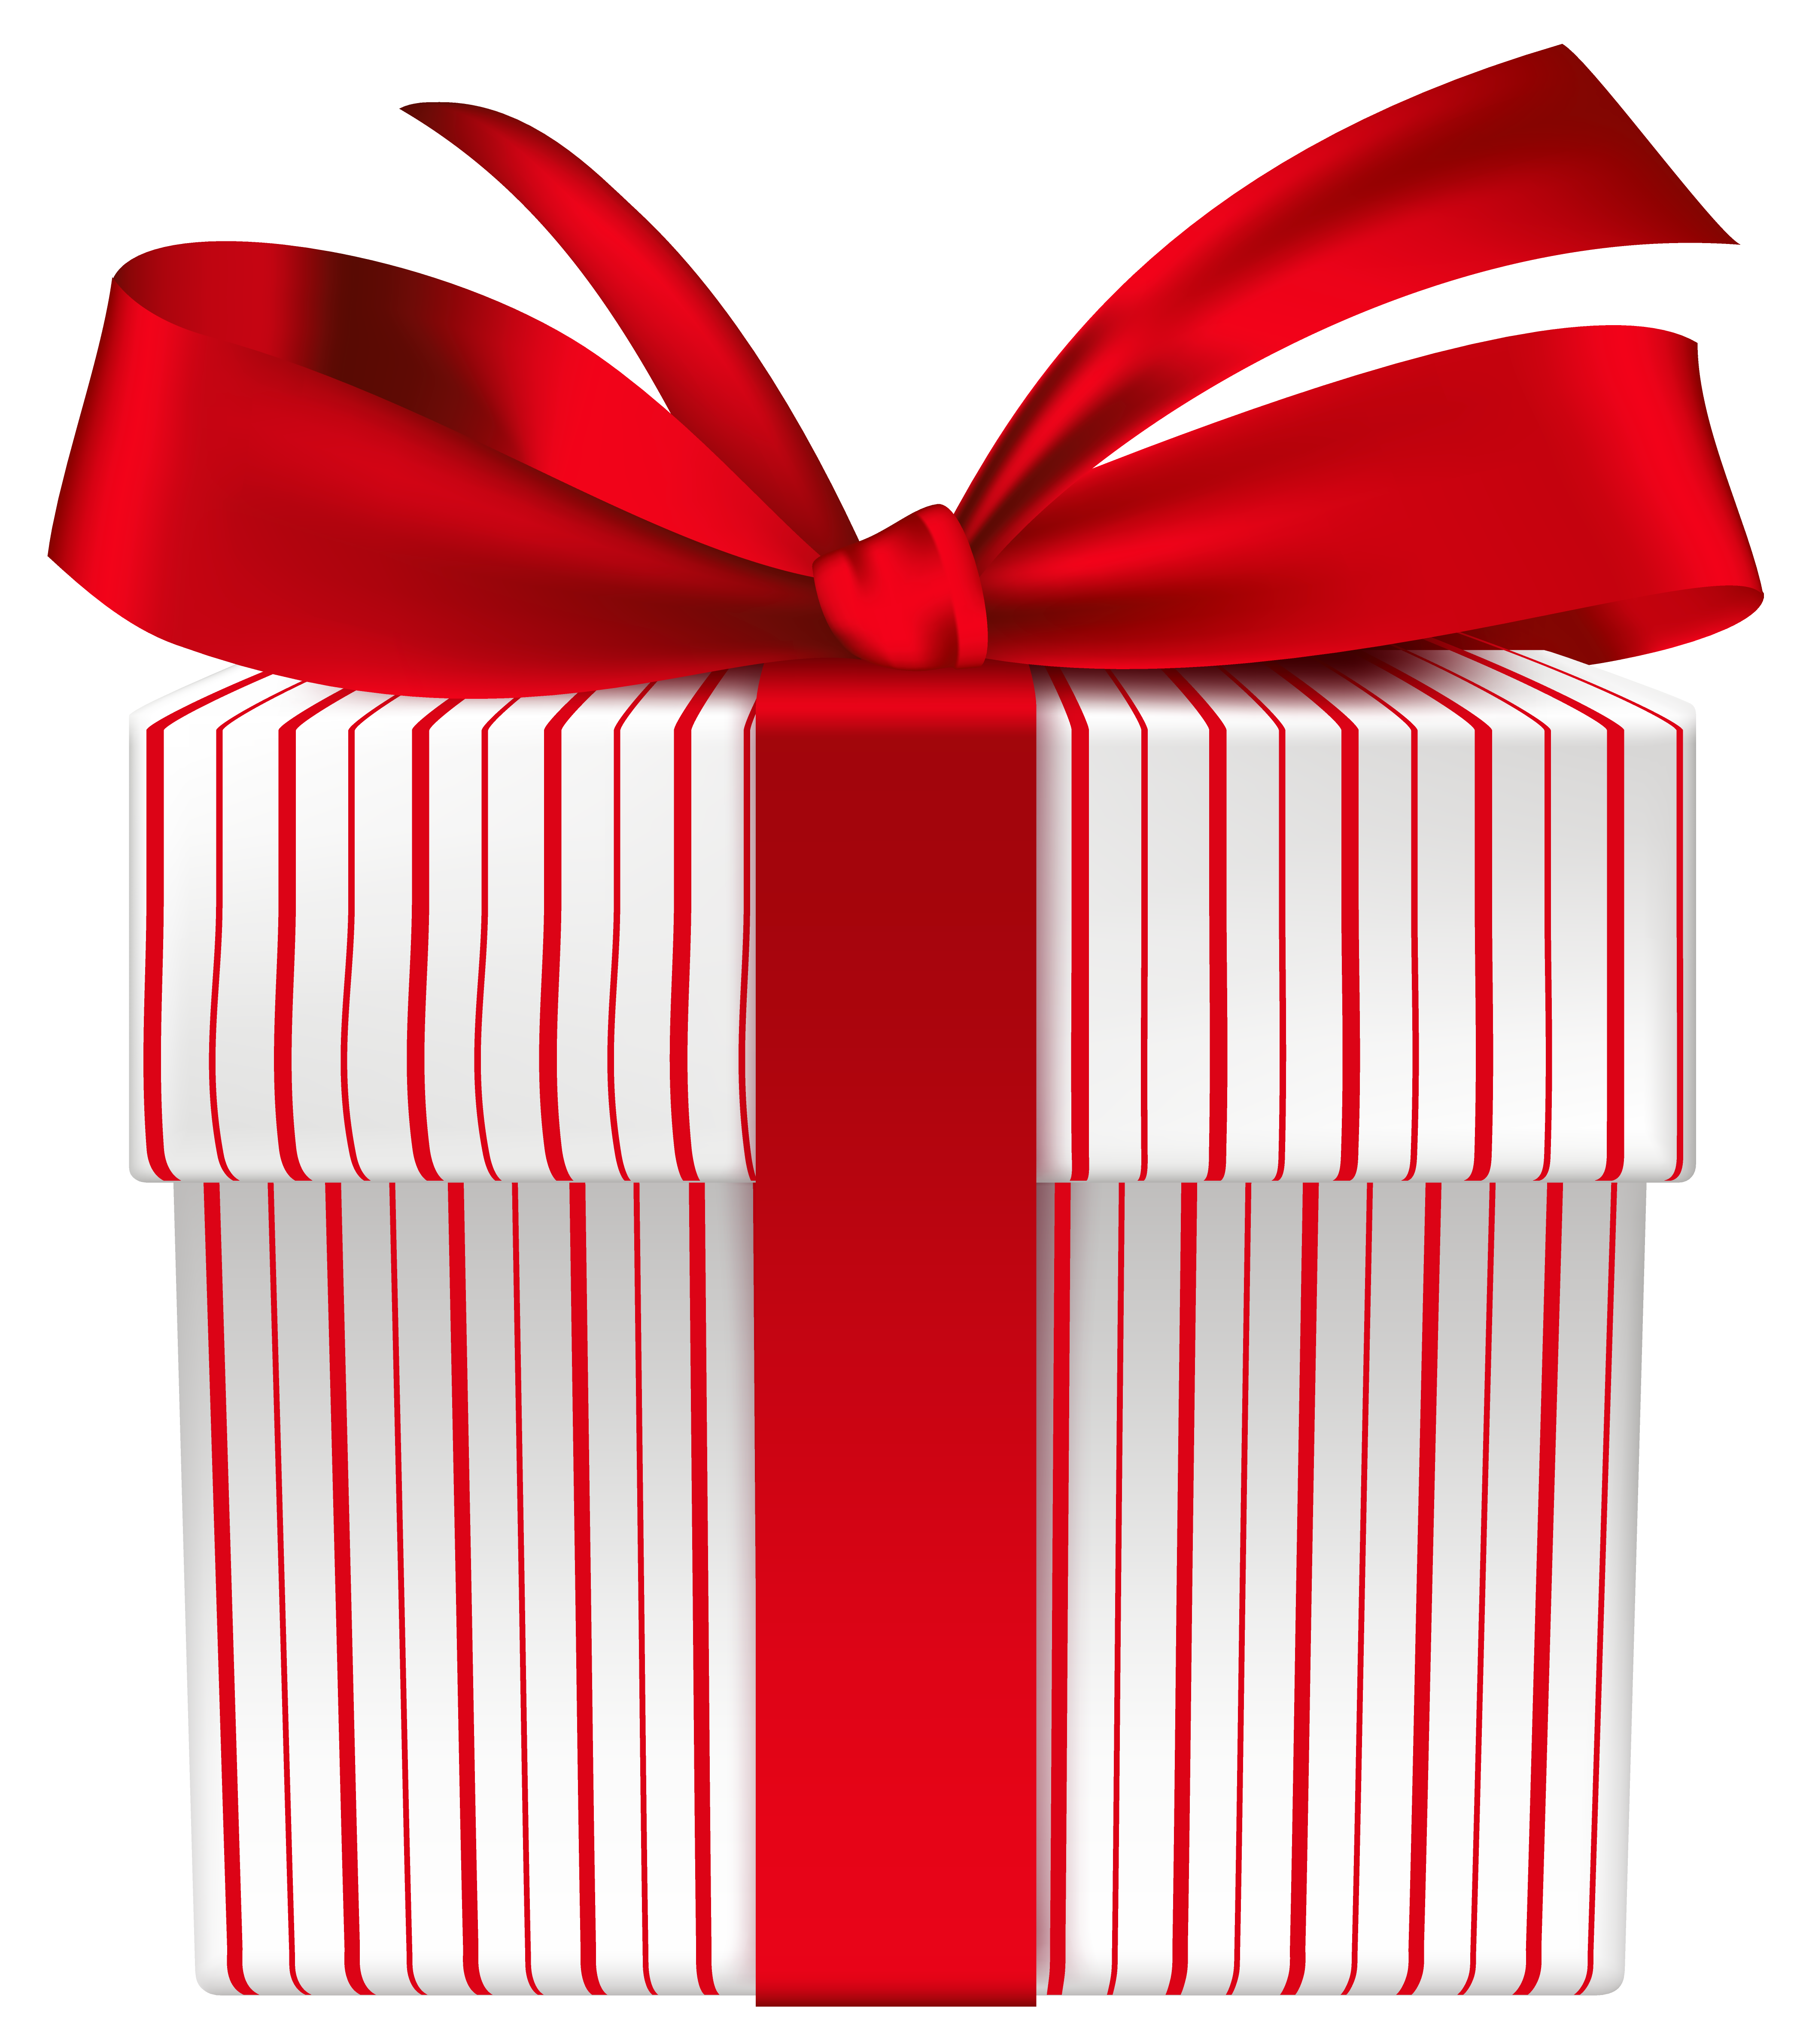 67+ Gift Box Image Clipart